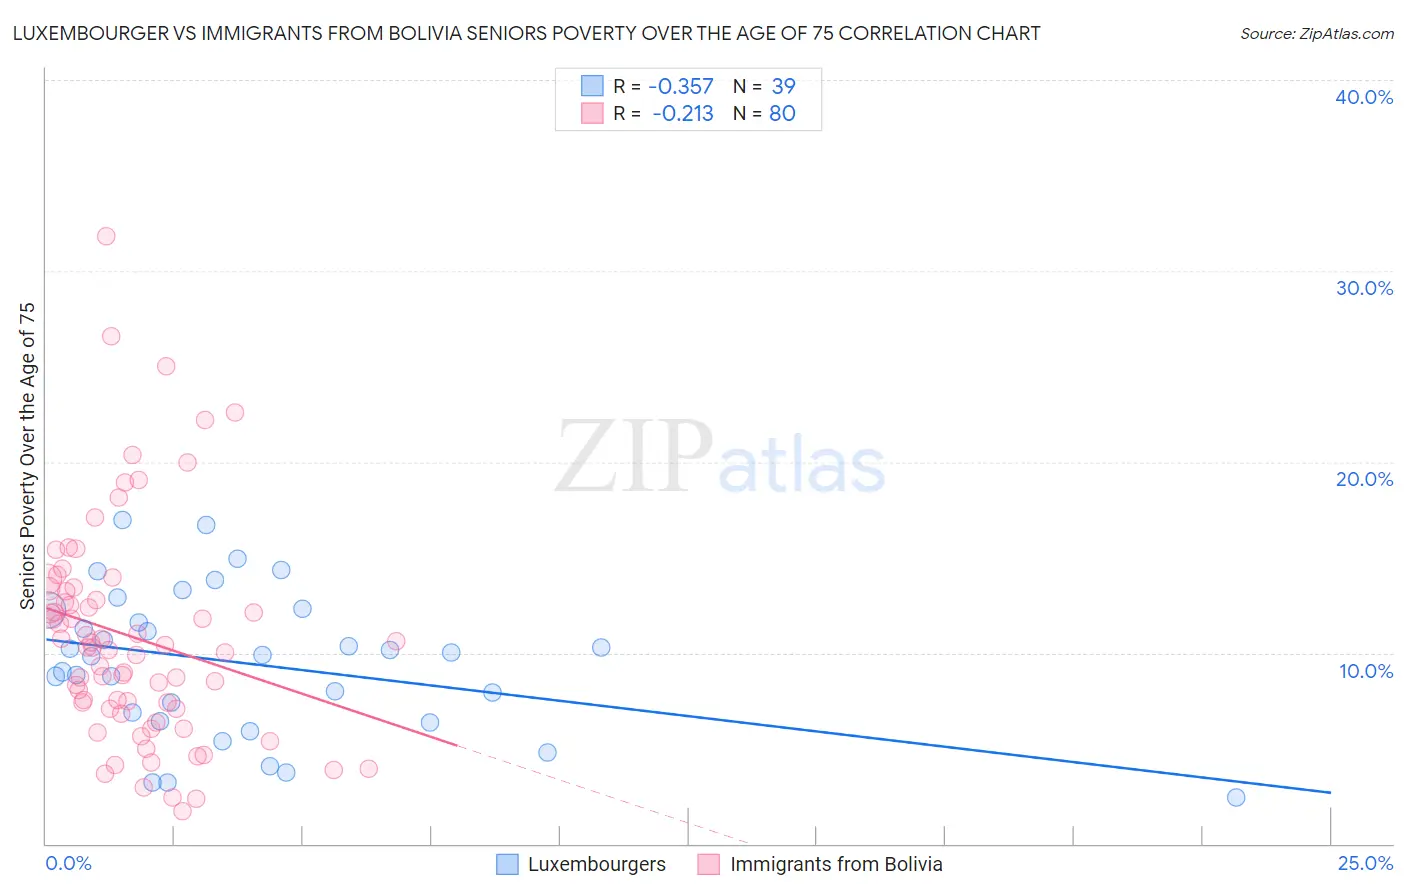 Luxembourger vs Immigrants from Bolivia Seniors Poverty Over the Age of 75